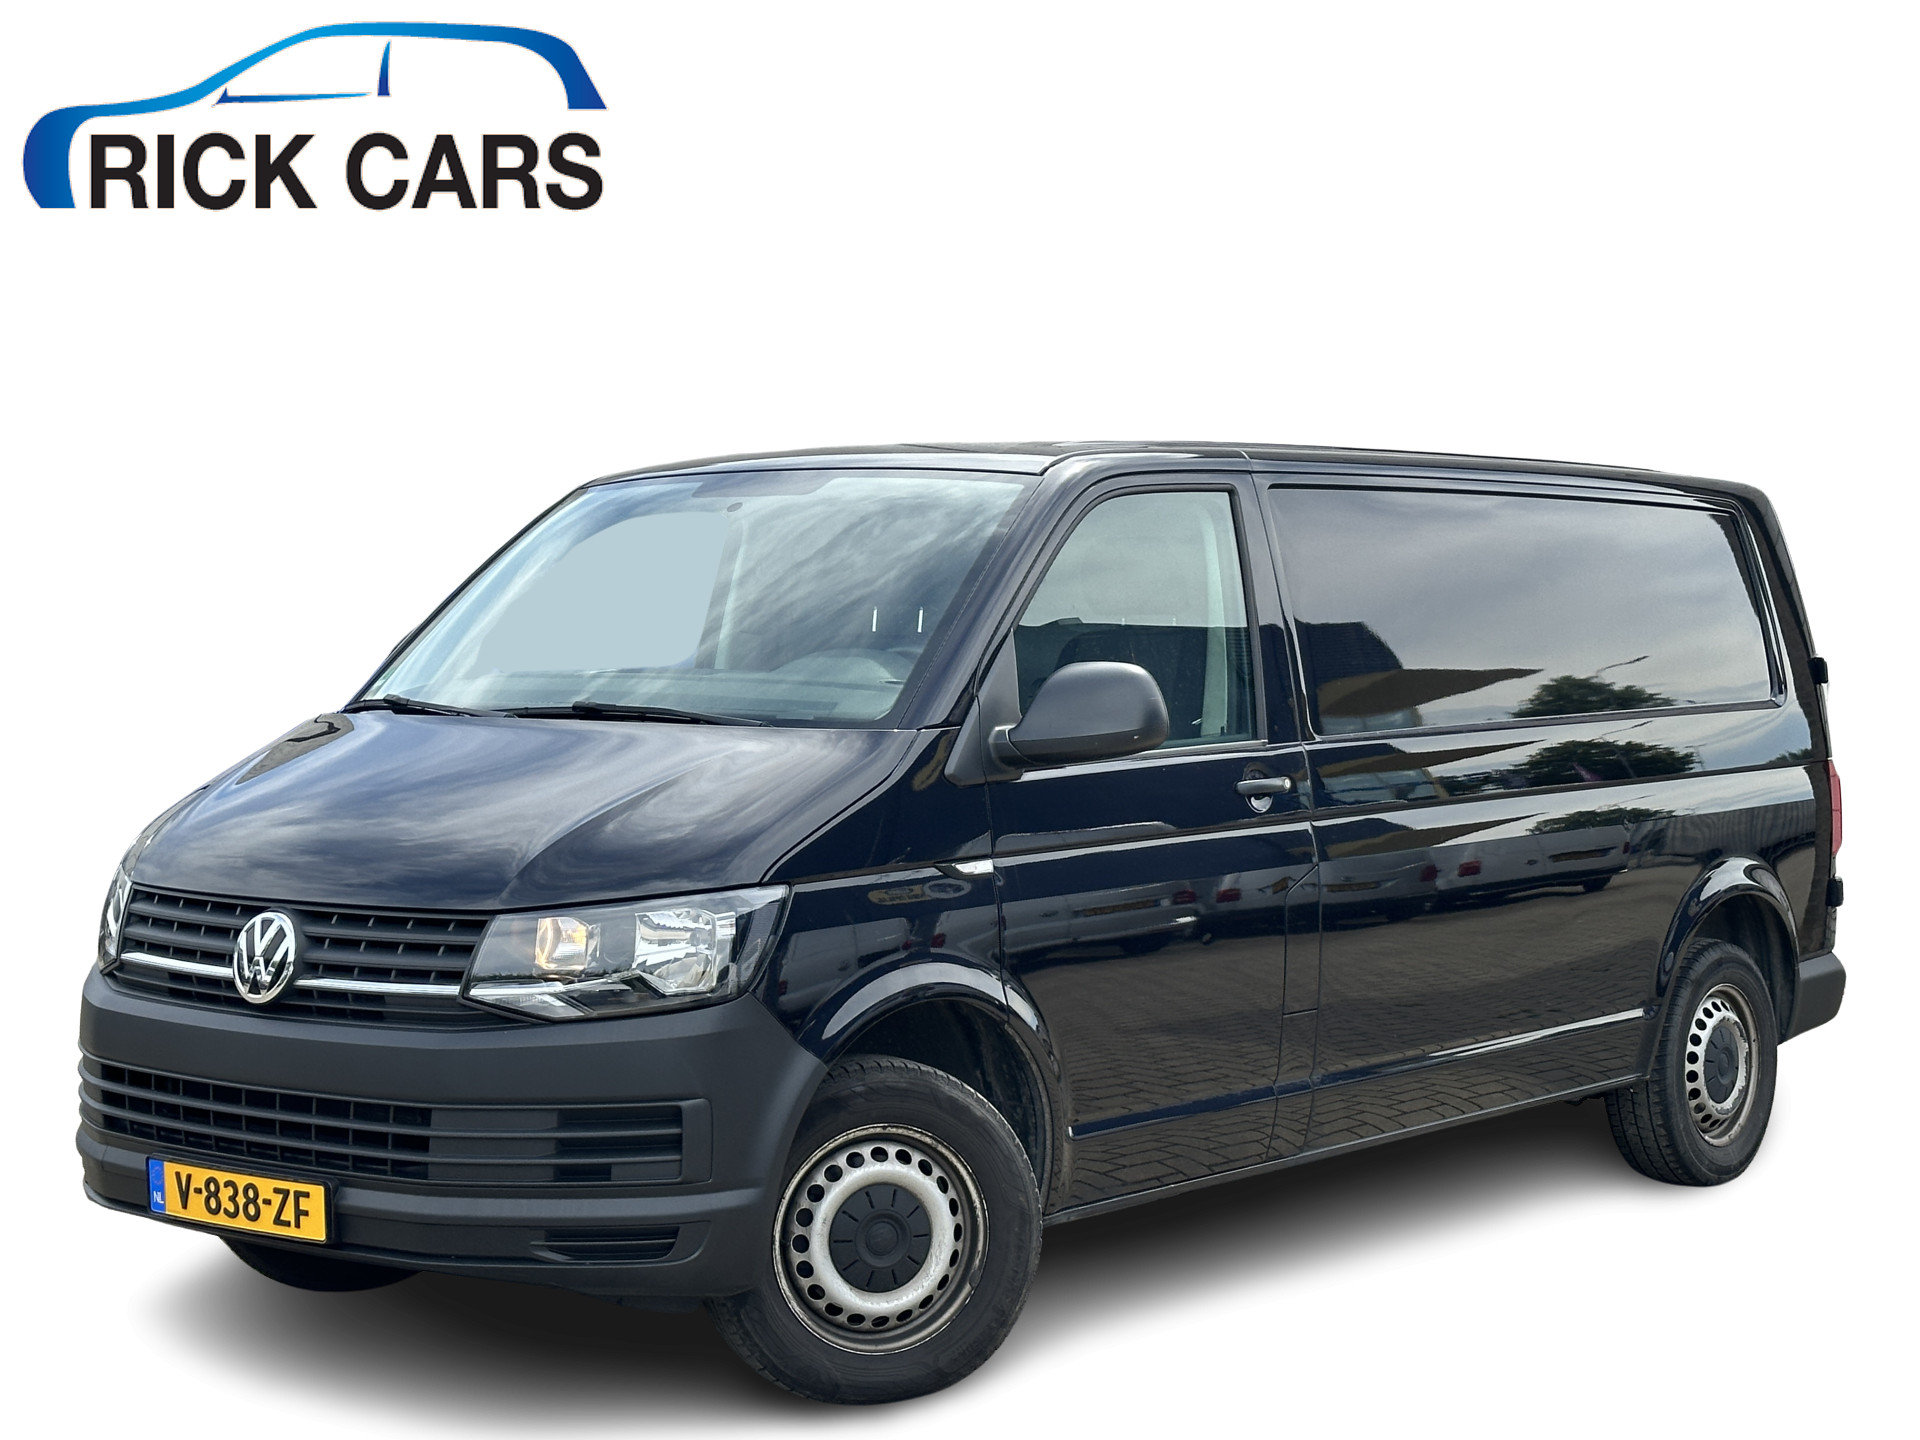 Volkswagen Transporter 2.0 TDI 150PK automaat EURO6 L2H1 App Connect/dab+/cruise control